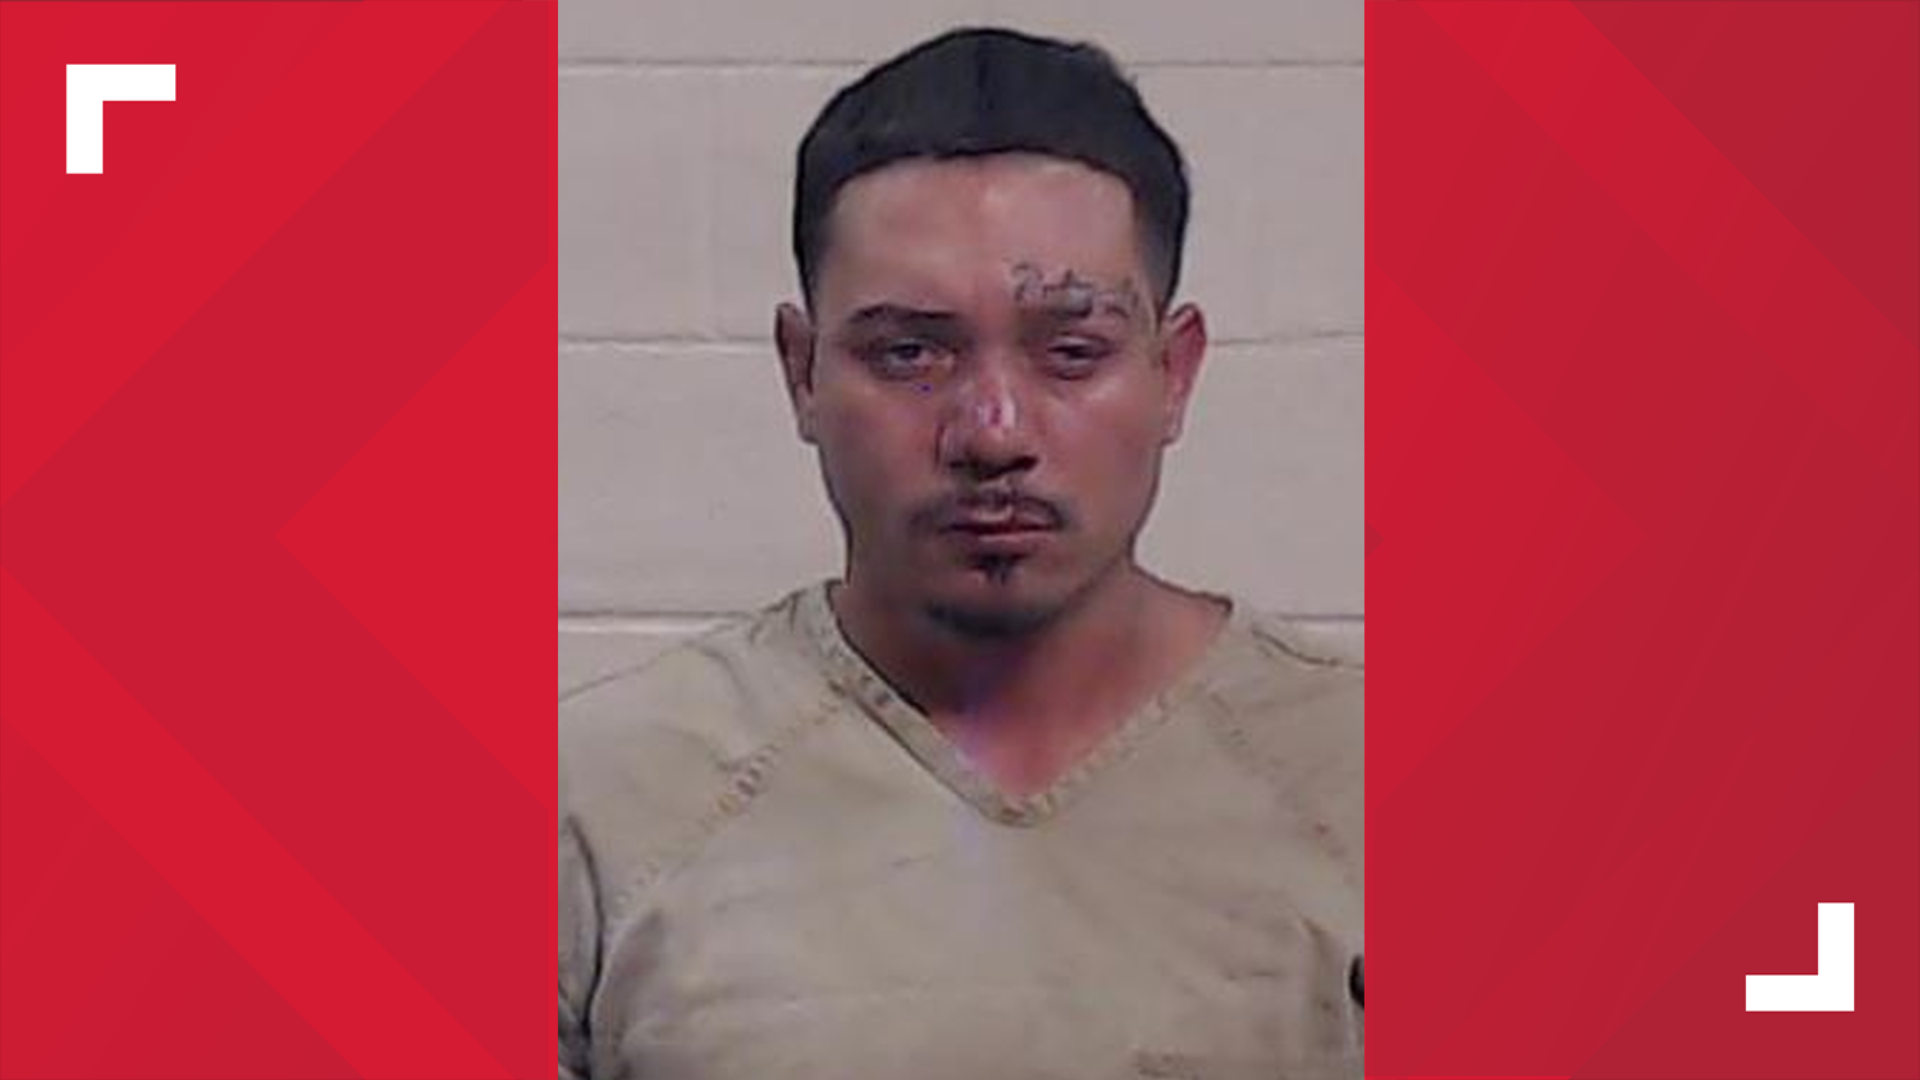 Leo Flores pleaded guilty to four counts of intoxication manslaughter on Monday.